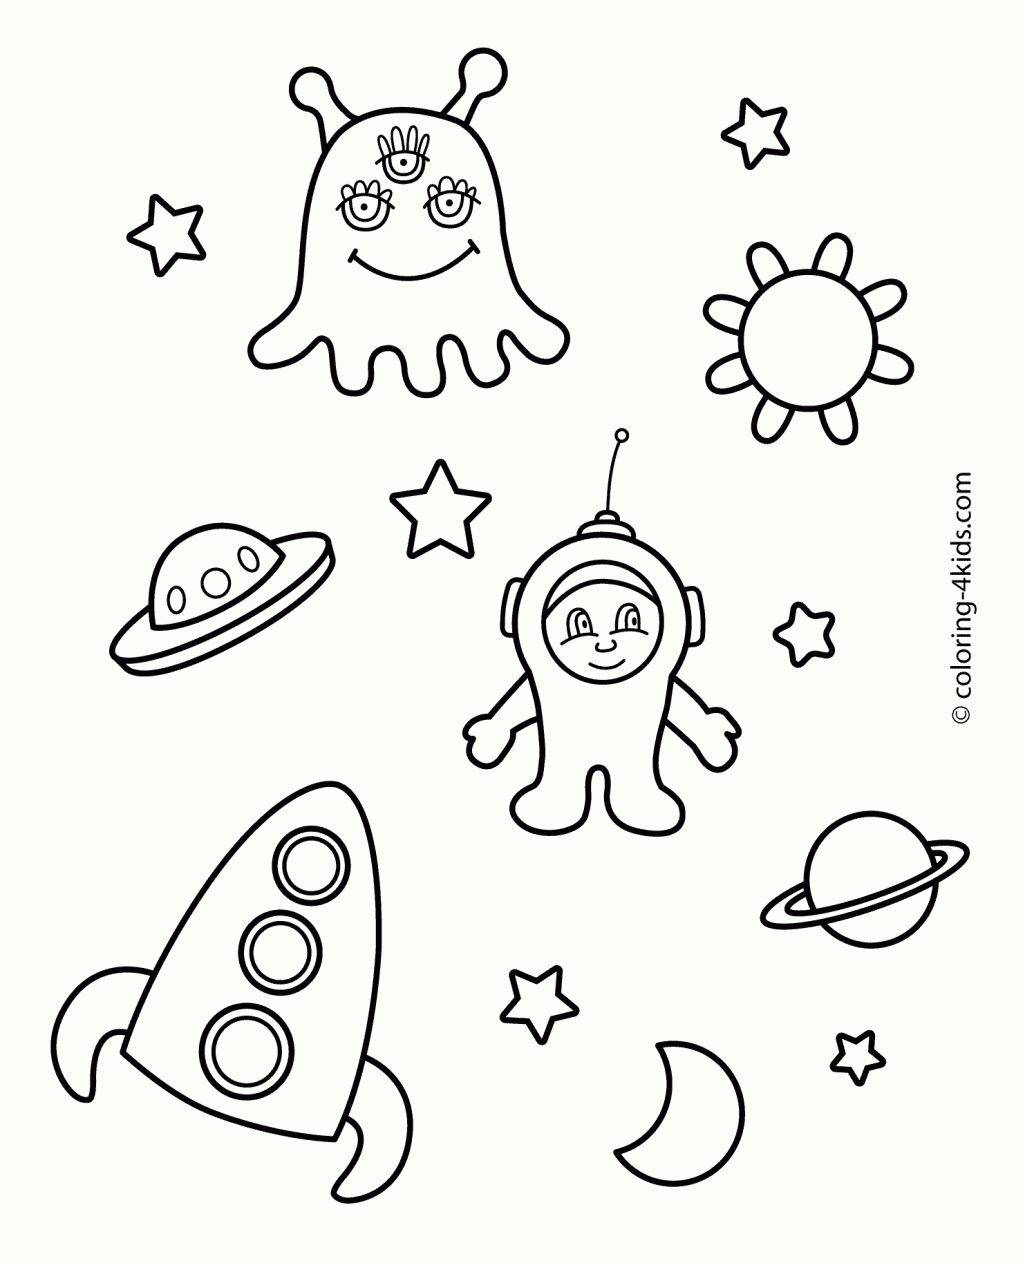 space-coloring-page-0093-q1